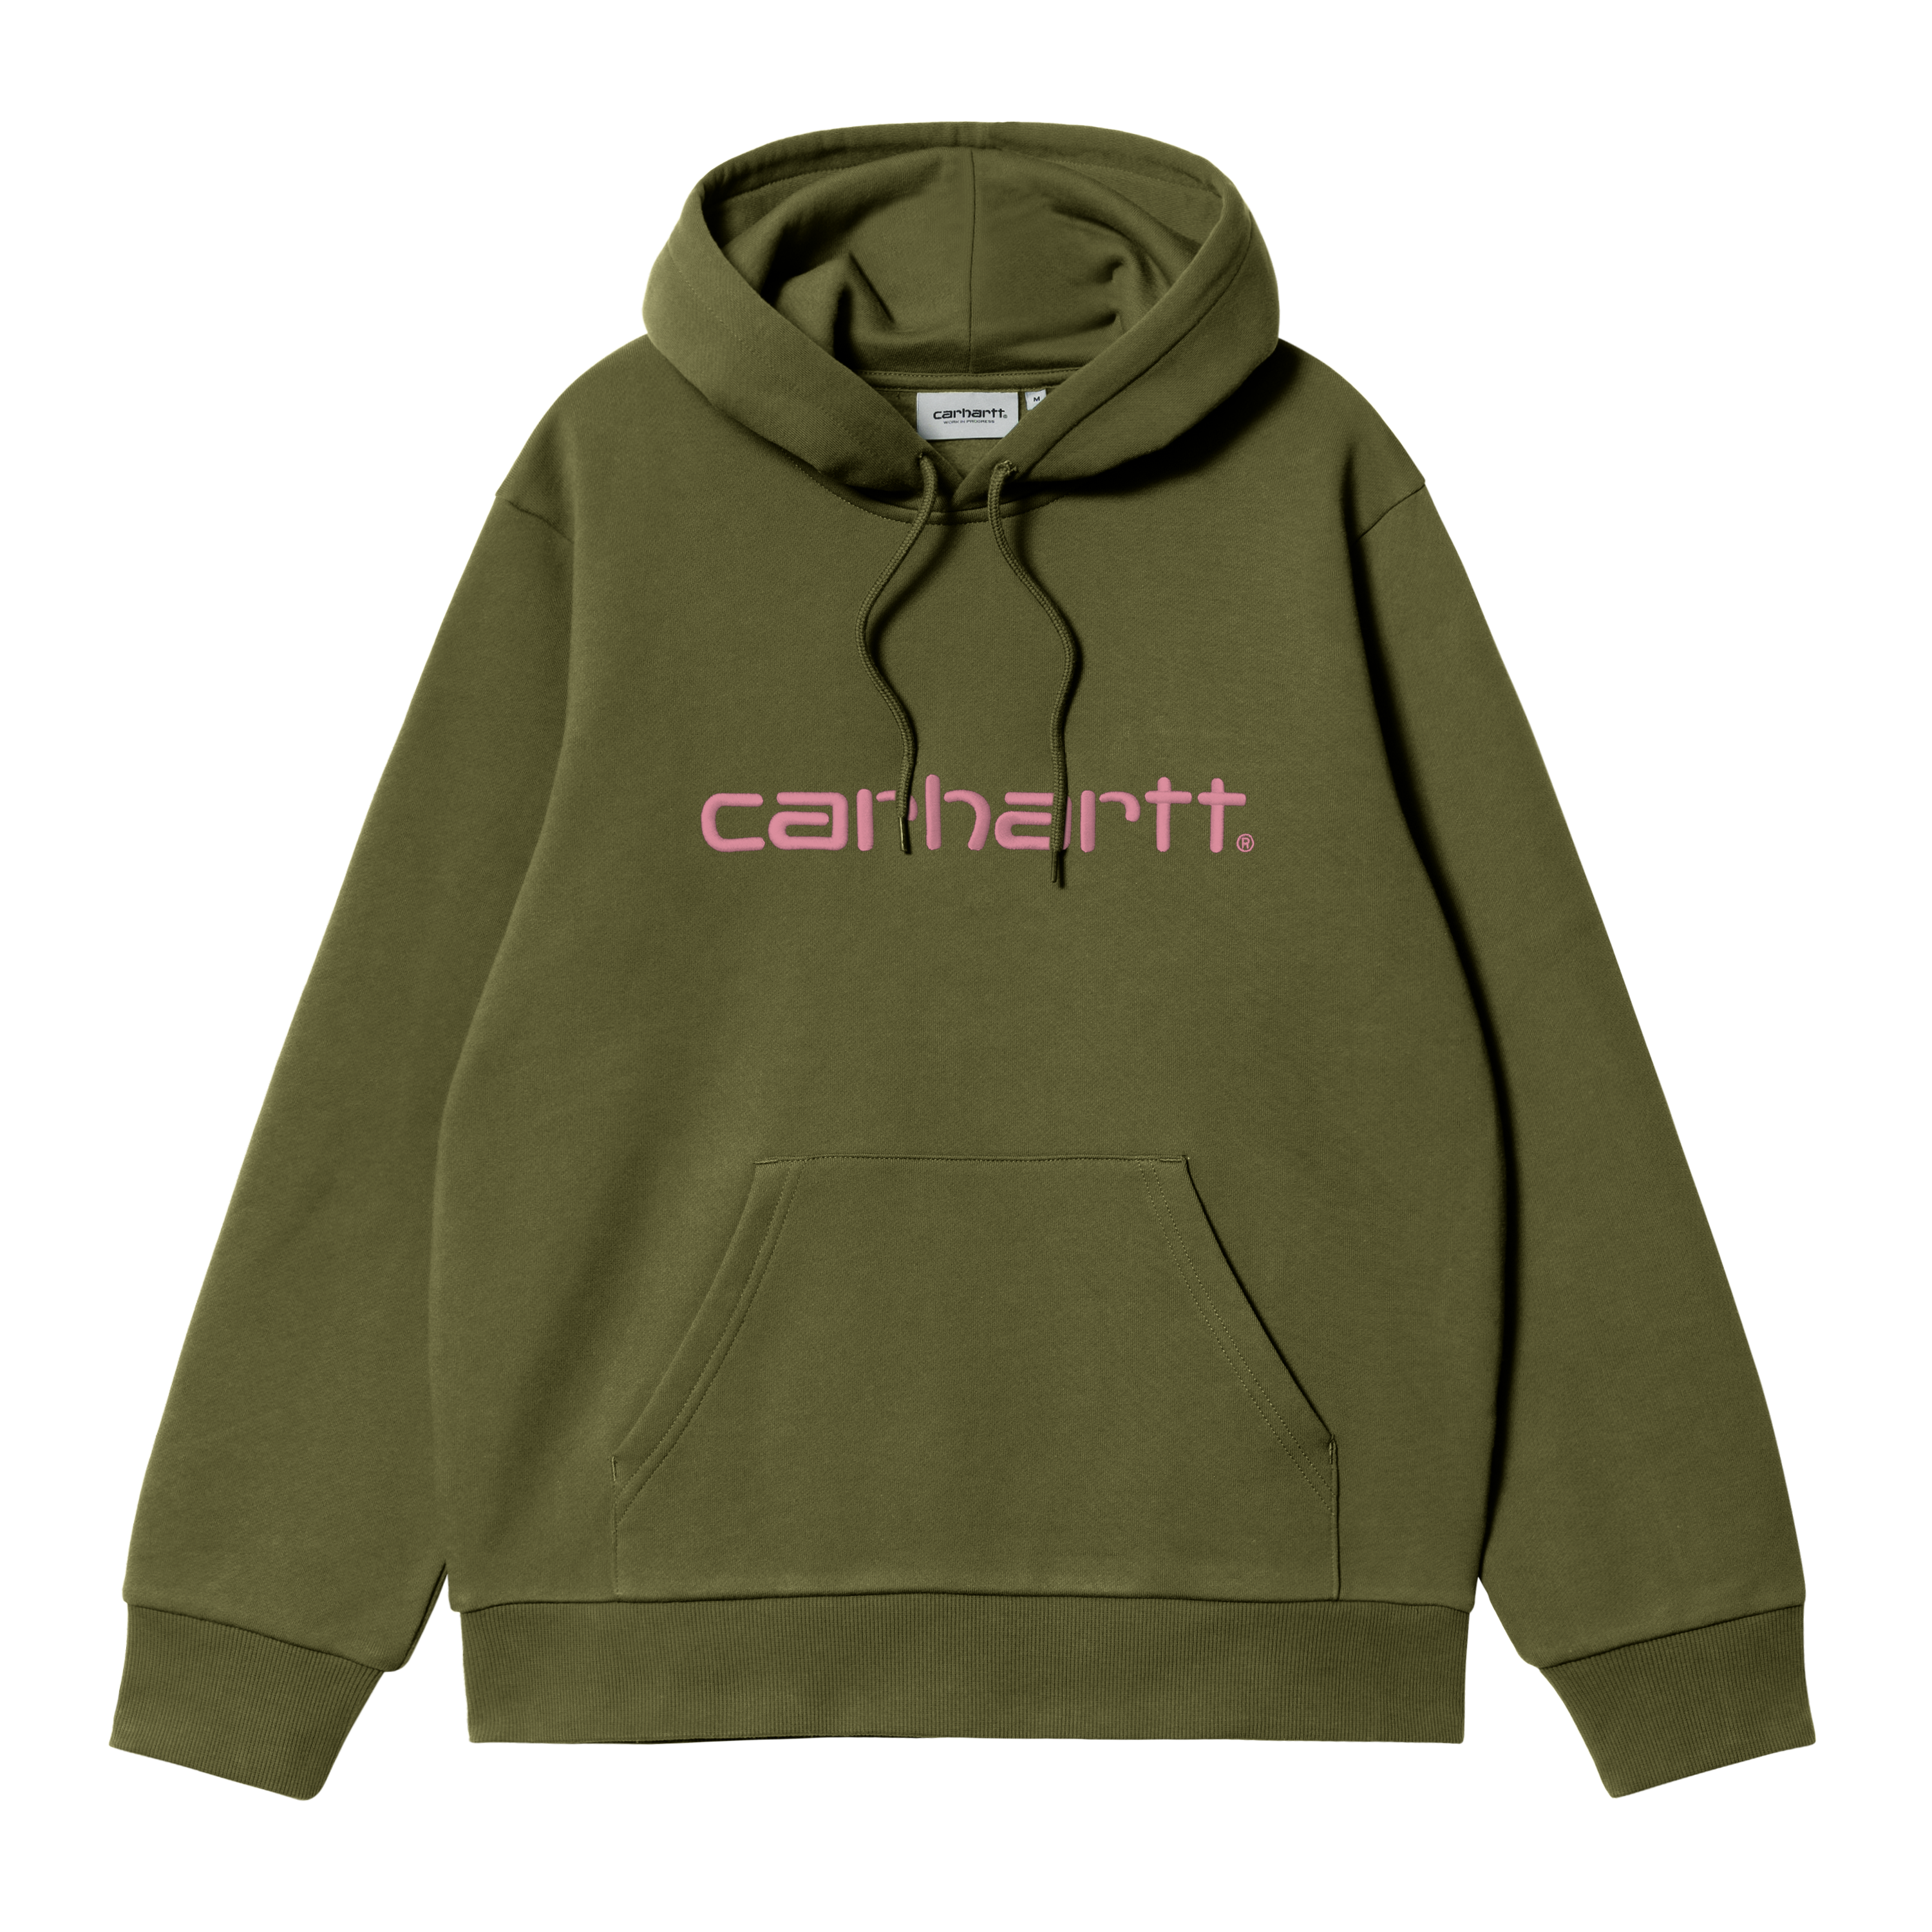 Brand new shipment of Carhartt WIP goods have just landed online